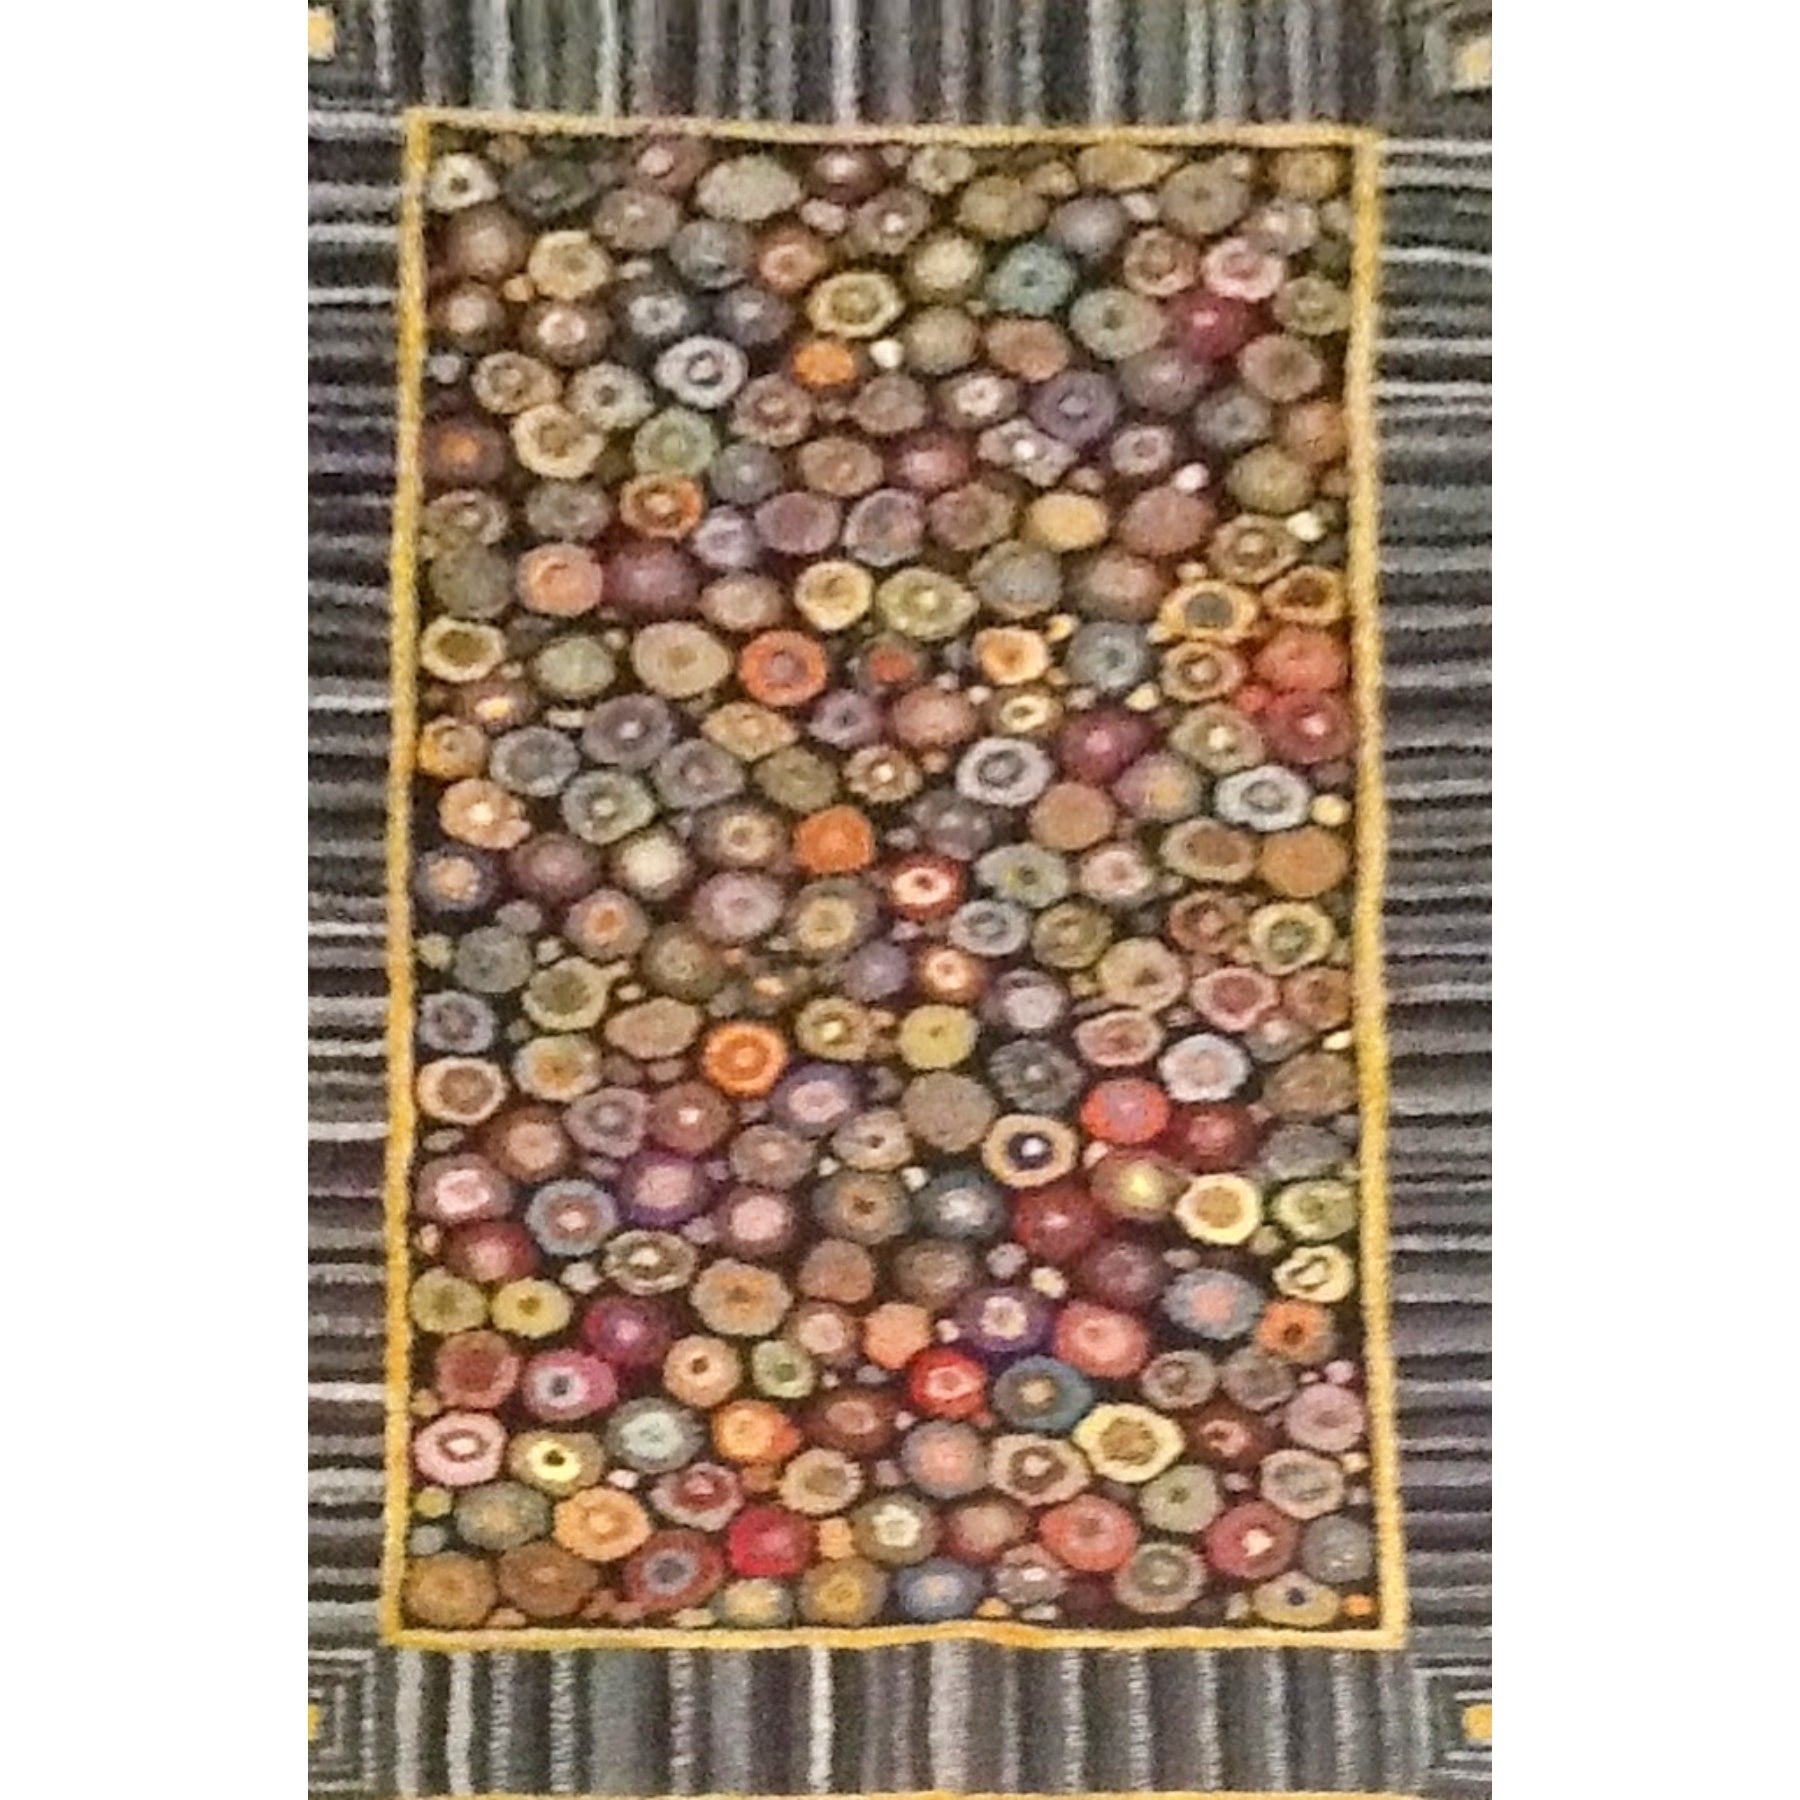 Mille Fluer, rug hooked by Andrea Lawlor